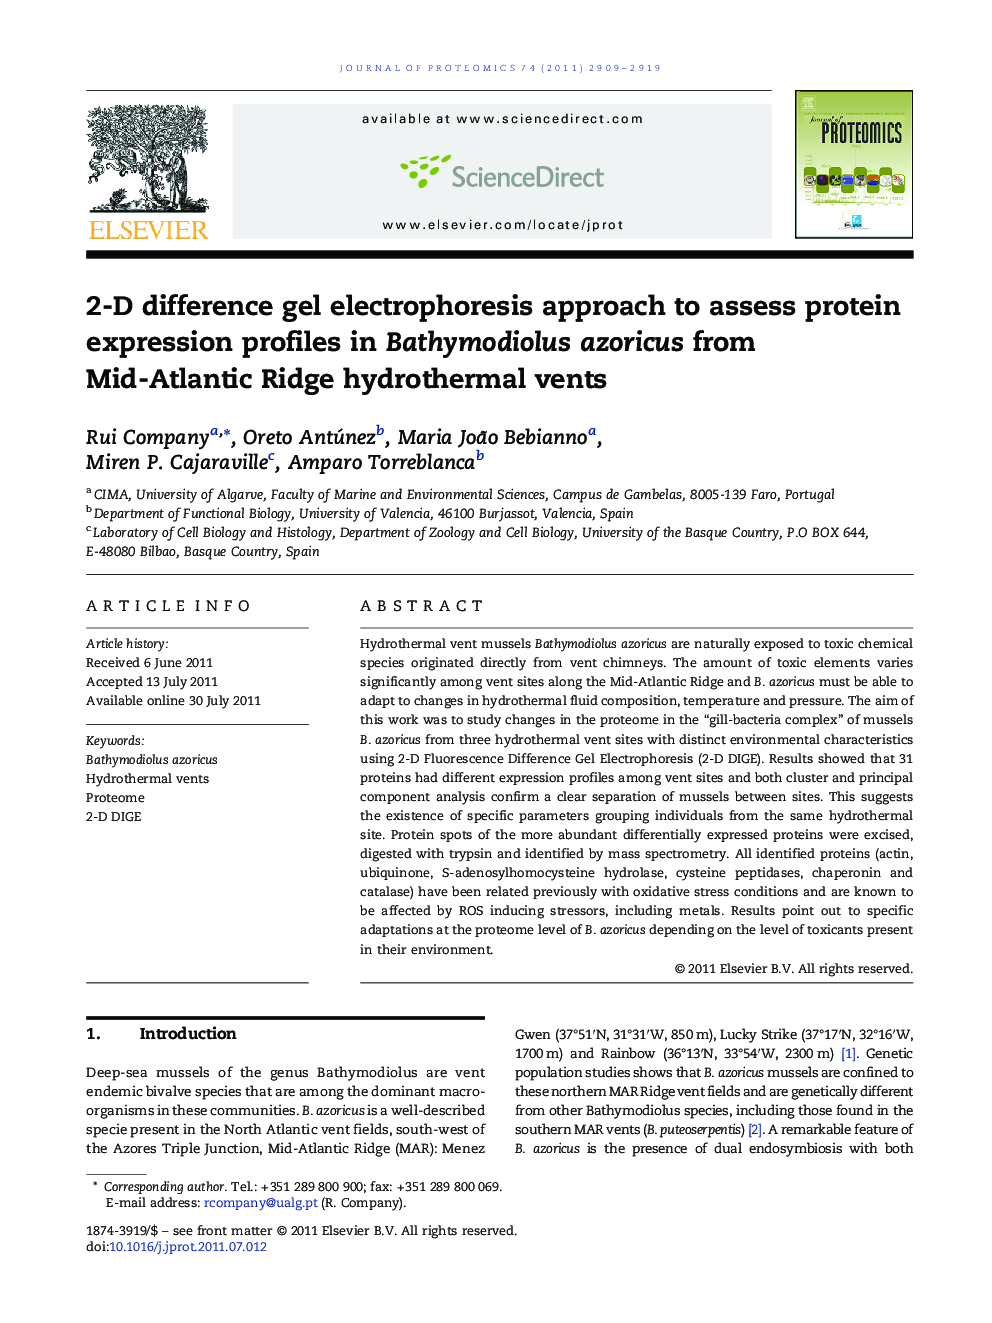 2-D difference gel electrophoresis approach to assess protein expression profiles in Bathymodiolus azoricus from Mid-Atlantic Ridge hydrothermal vents